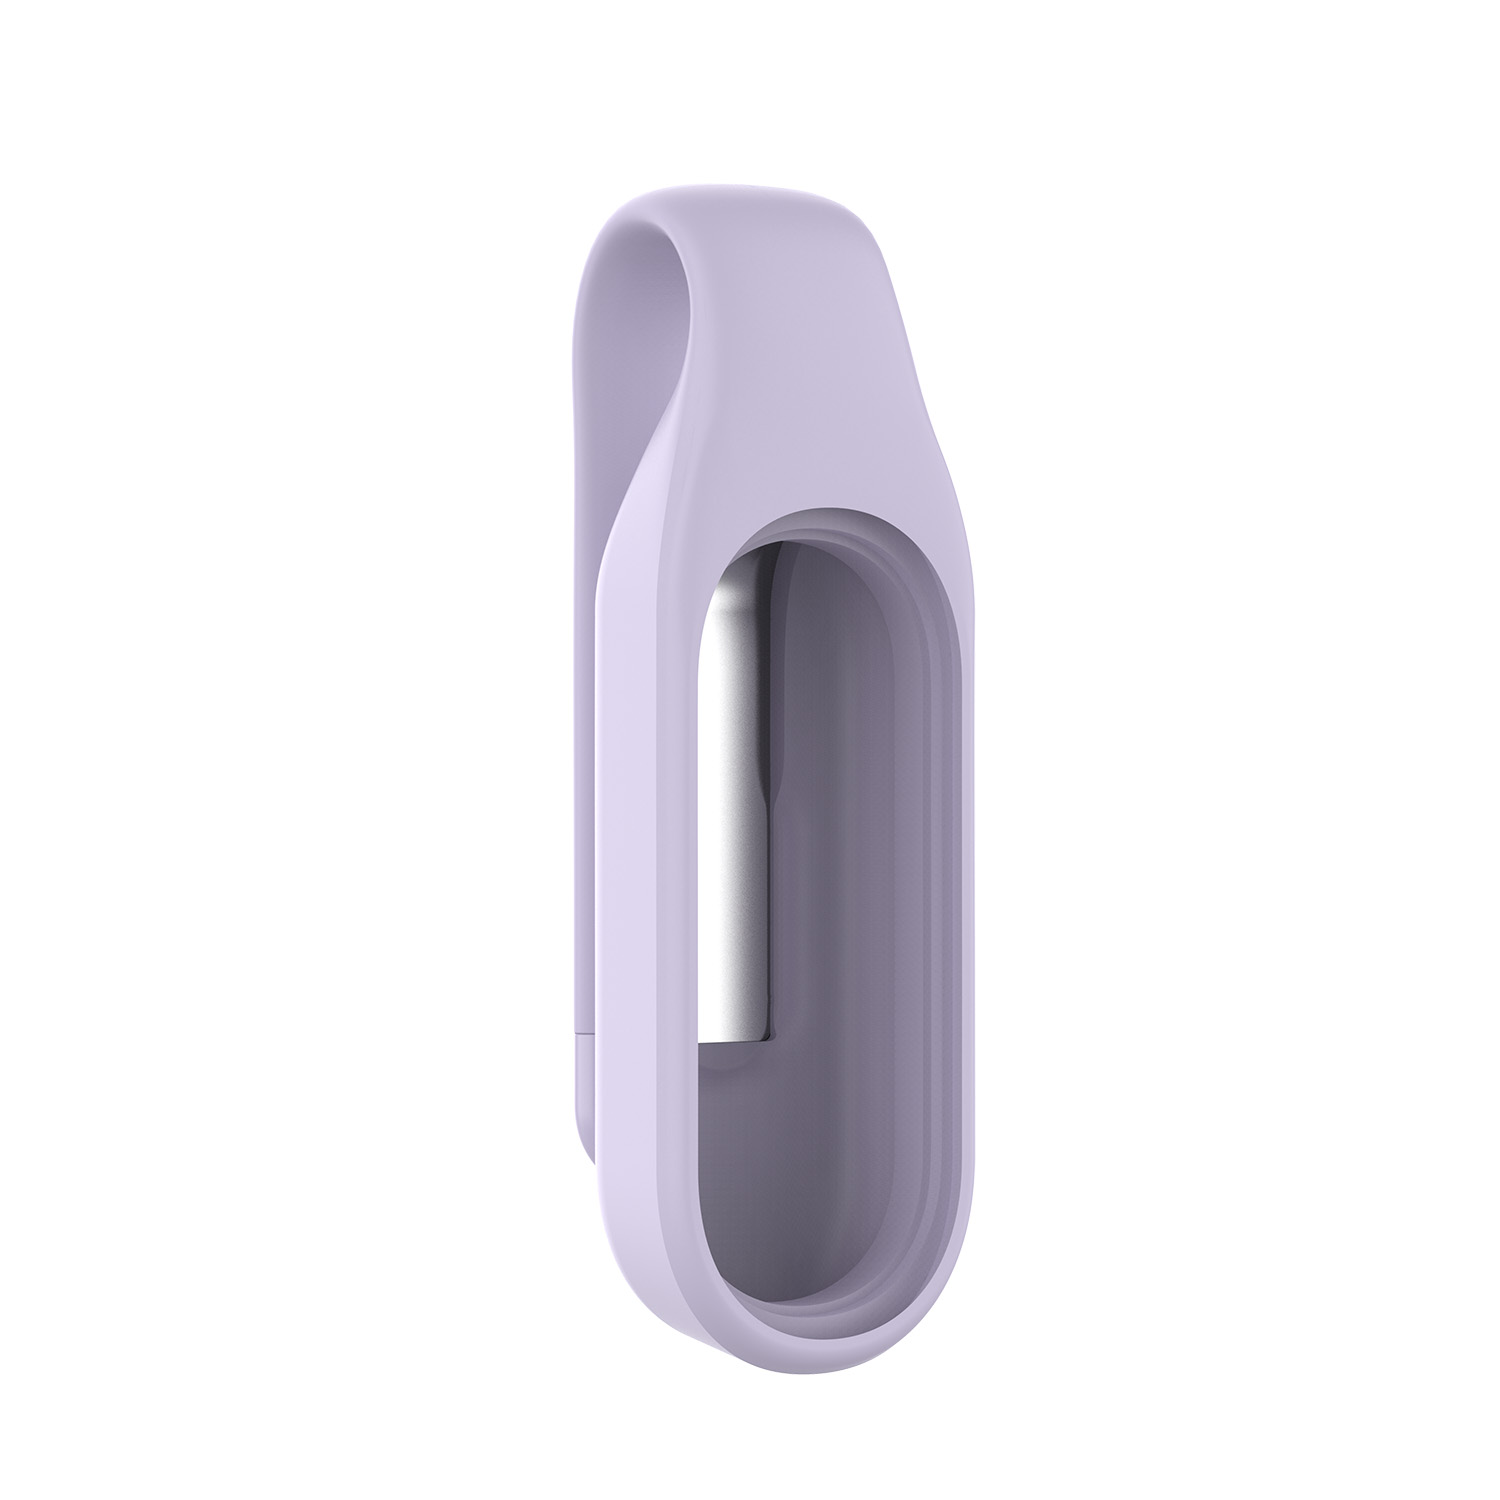 Find Bakeey Watch Silicone Clip Watch Strap for Xiaomi Miband 5 Non original for Sale on Gipsybee.com with cryptocurrencies